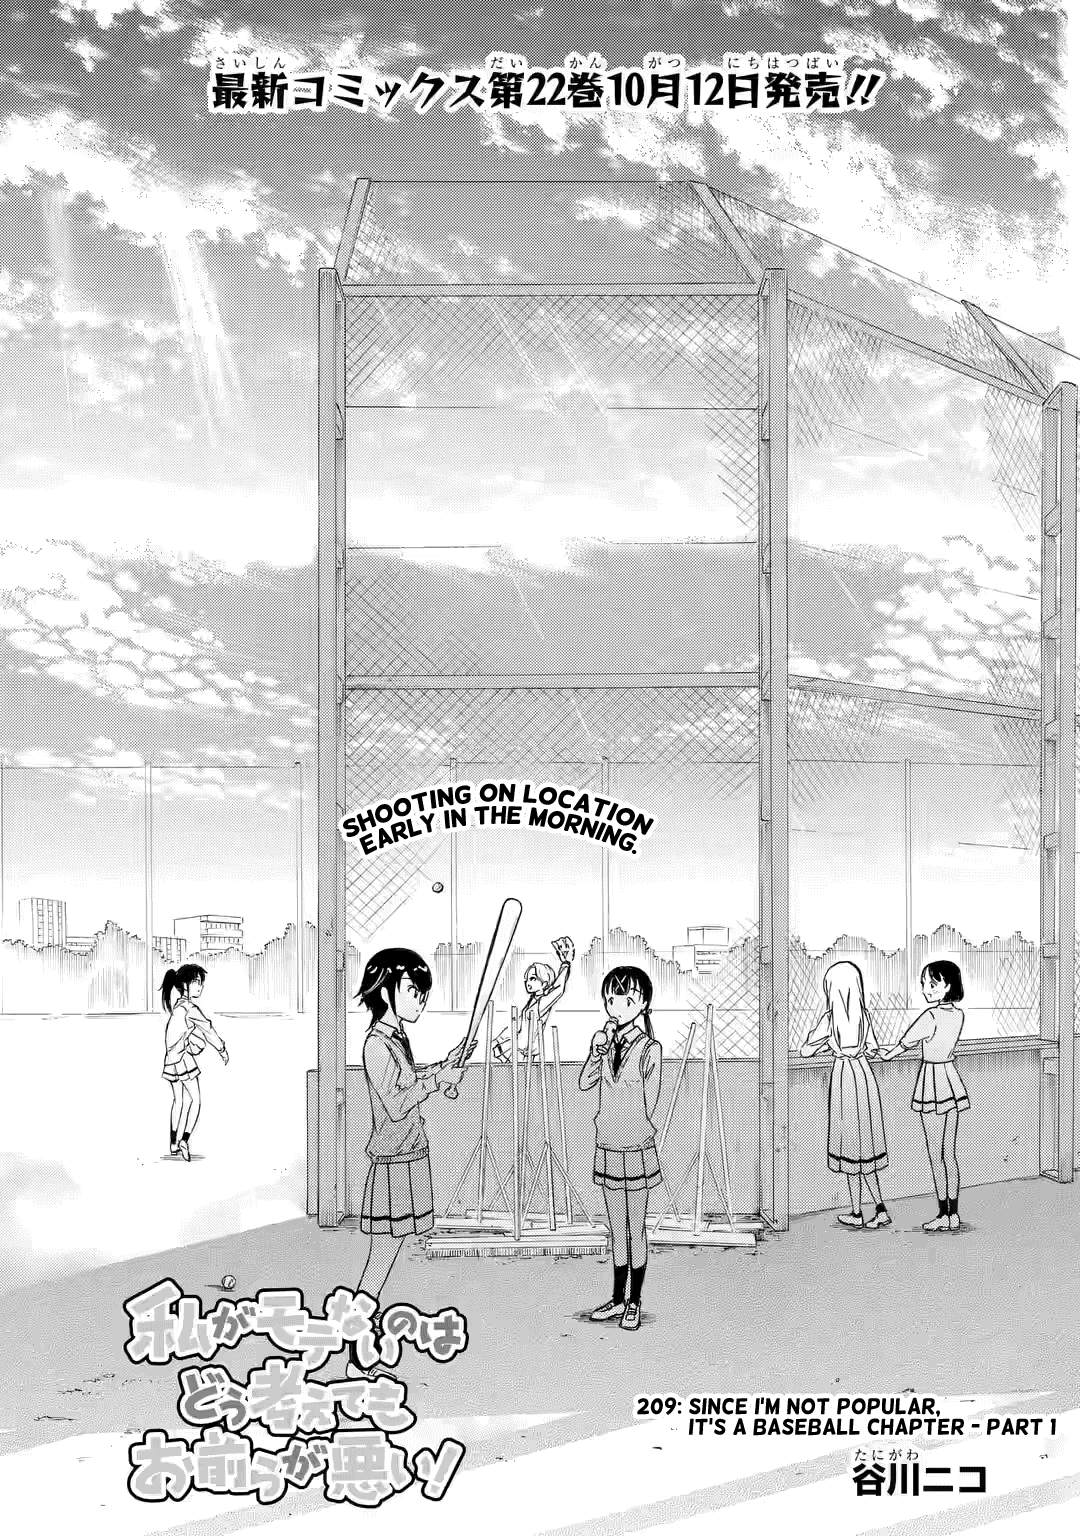 It's Not My Fault That I'm Not Popular! Chapter 209: Since I'm Not Popular, It's A Baseball Chapter (Part 1) - Picture 1